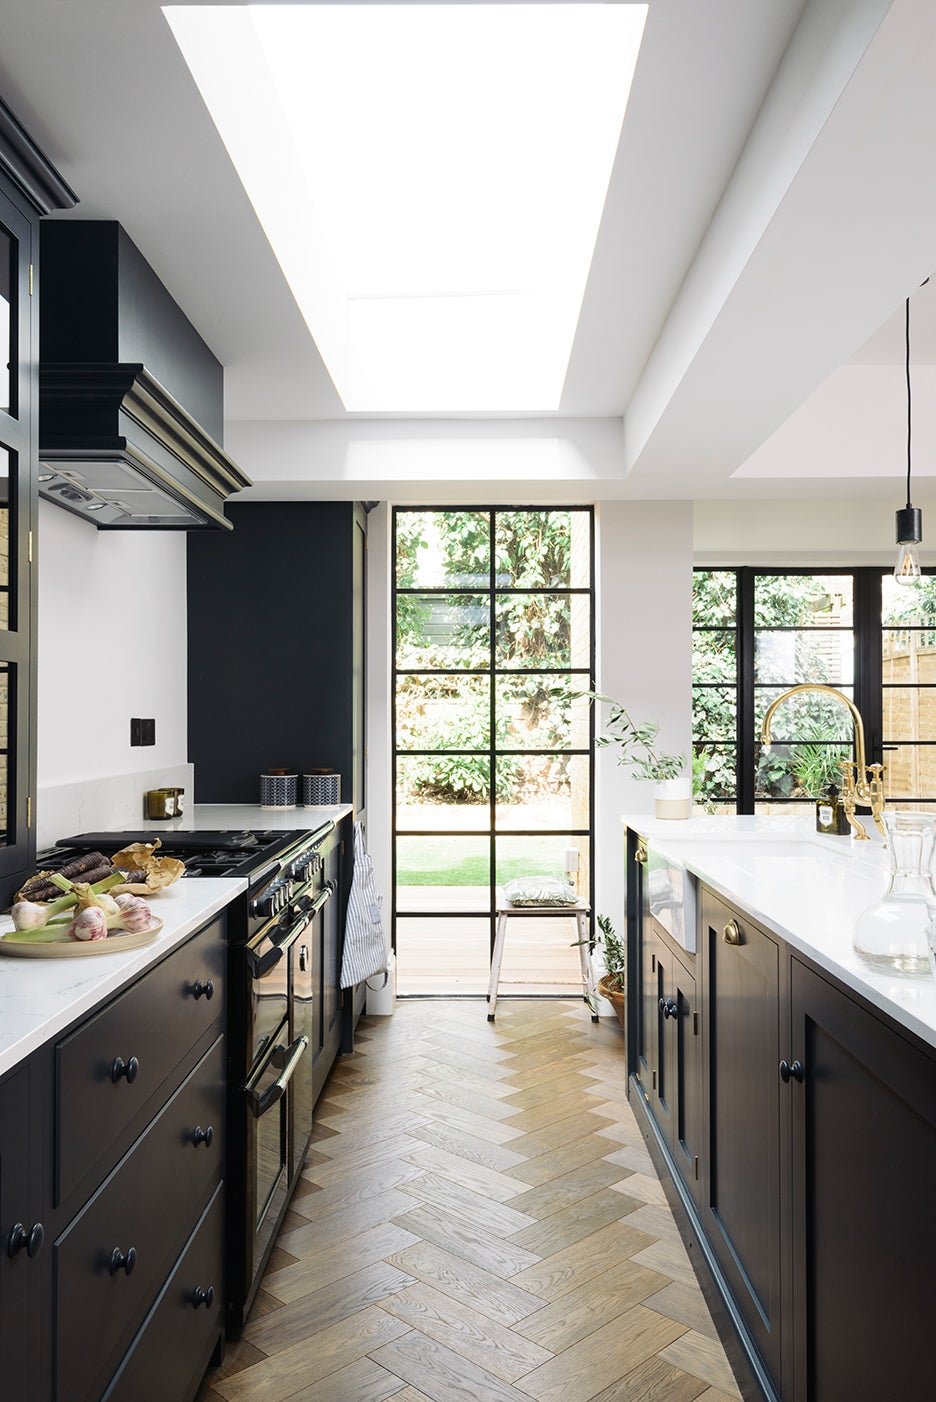 7 Top Paint Brands Reveal Their Best-Selling Kitchen Cabinet Colors